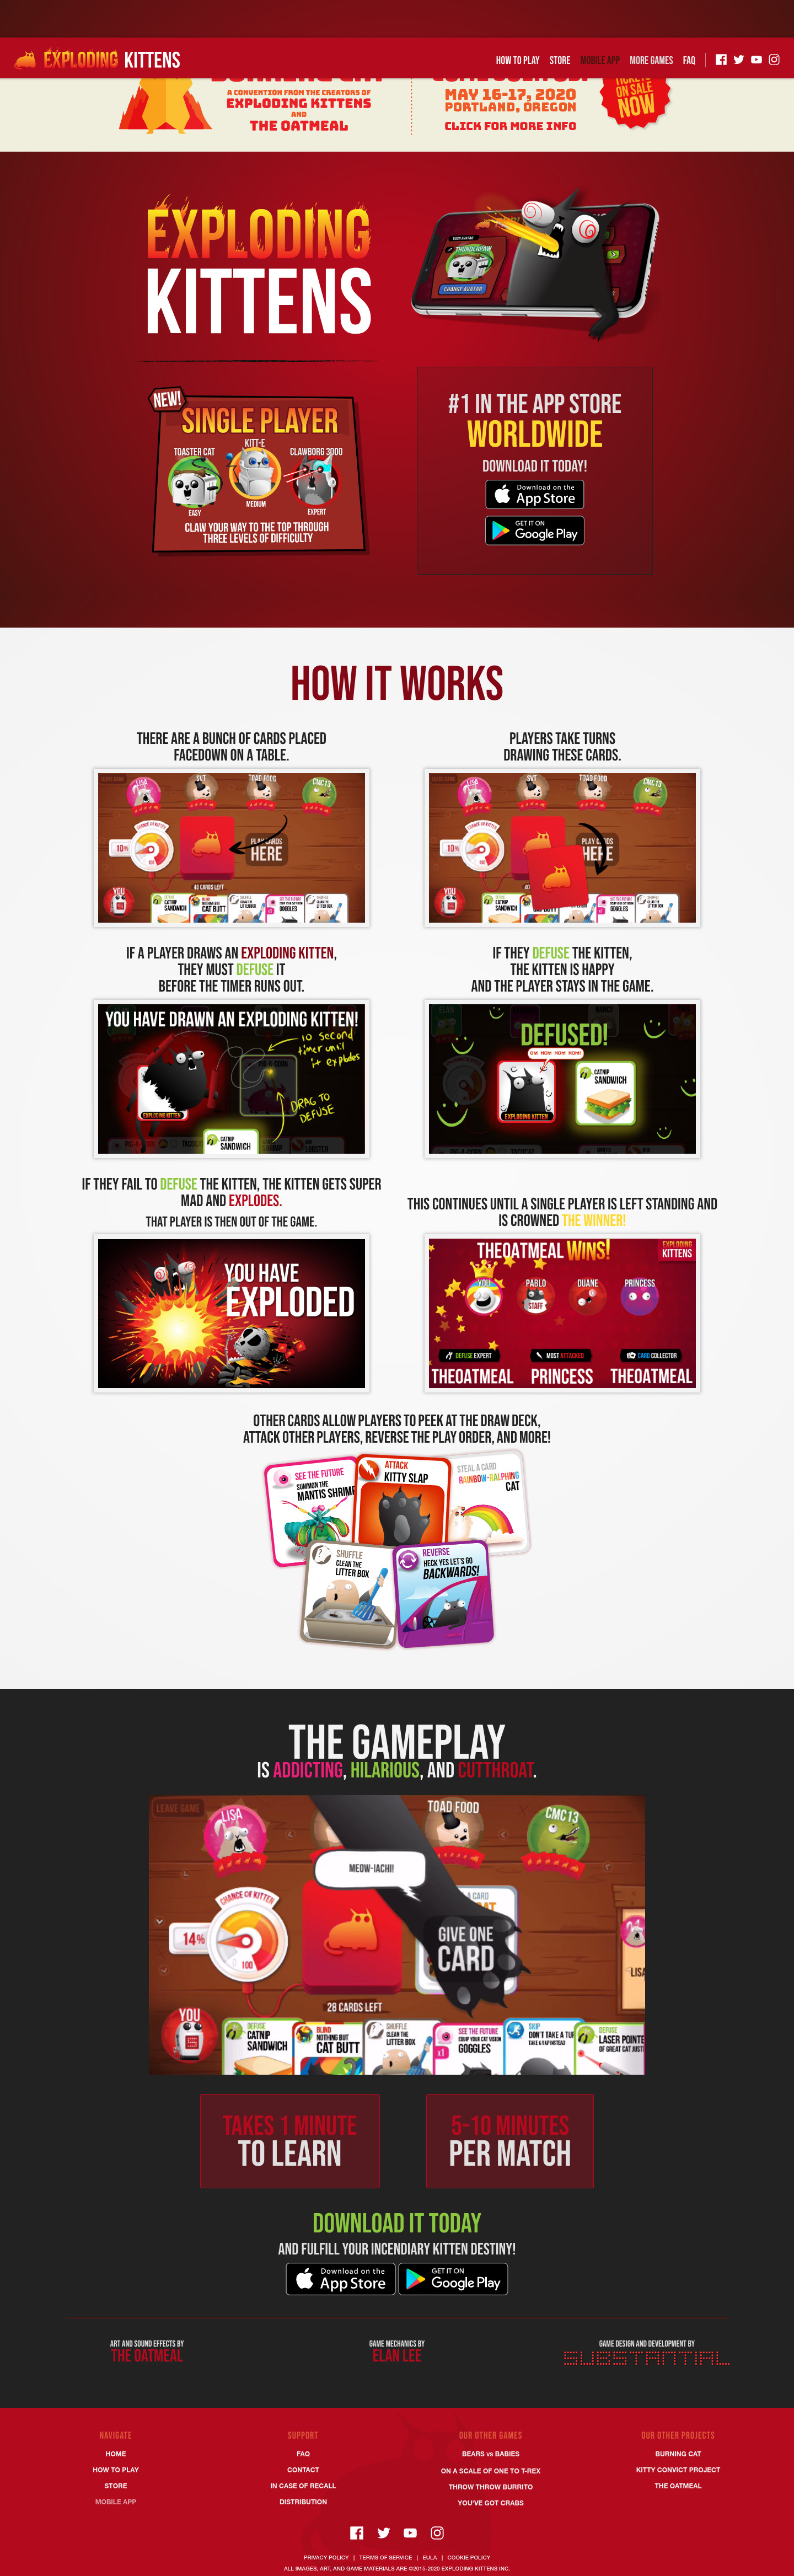 /page/explodingkittens